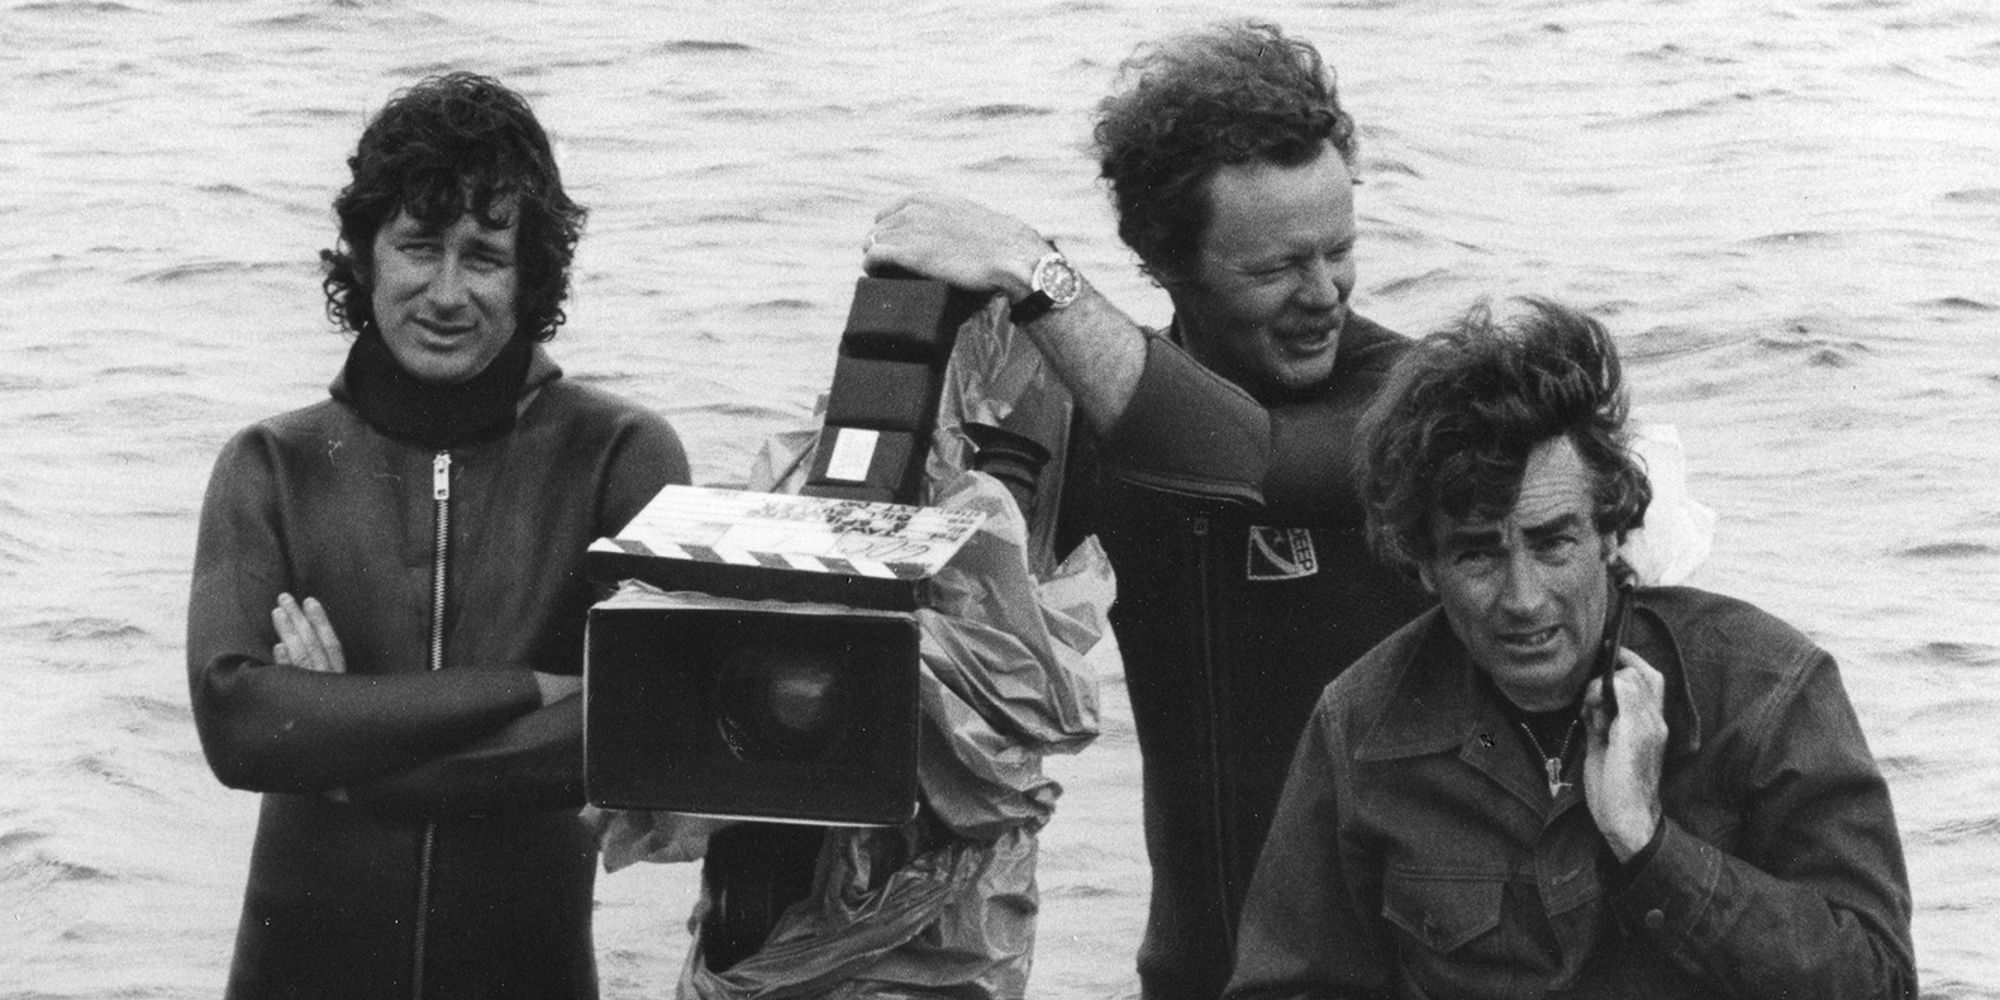 Behind the scenes photo of Steven Spielberg and crew members on the set of Jaws